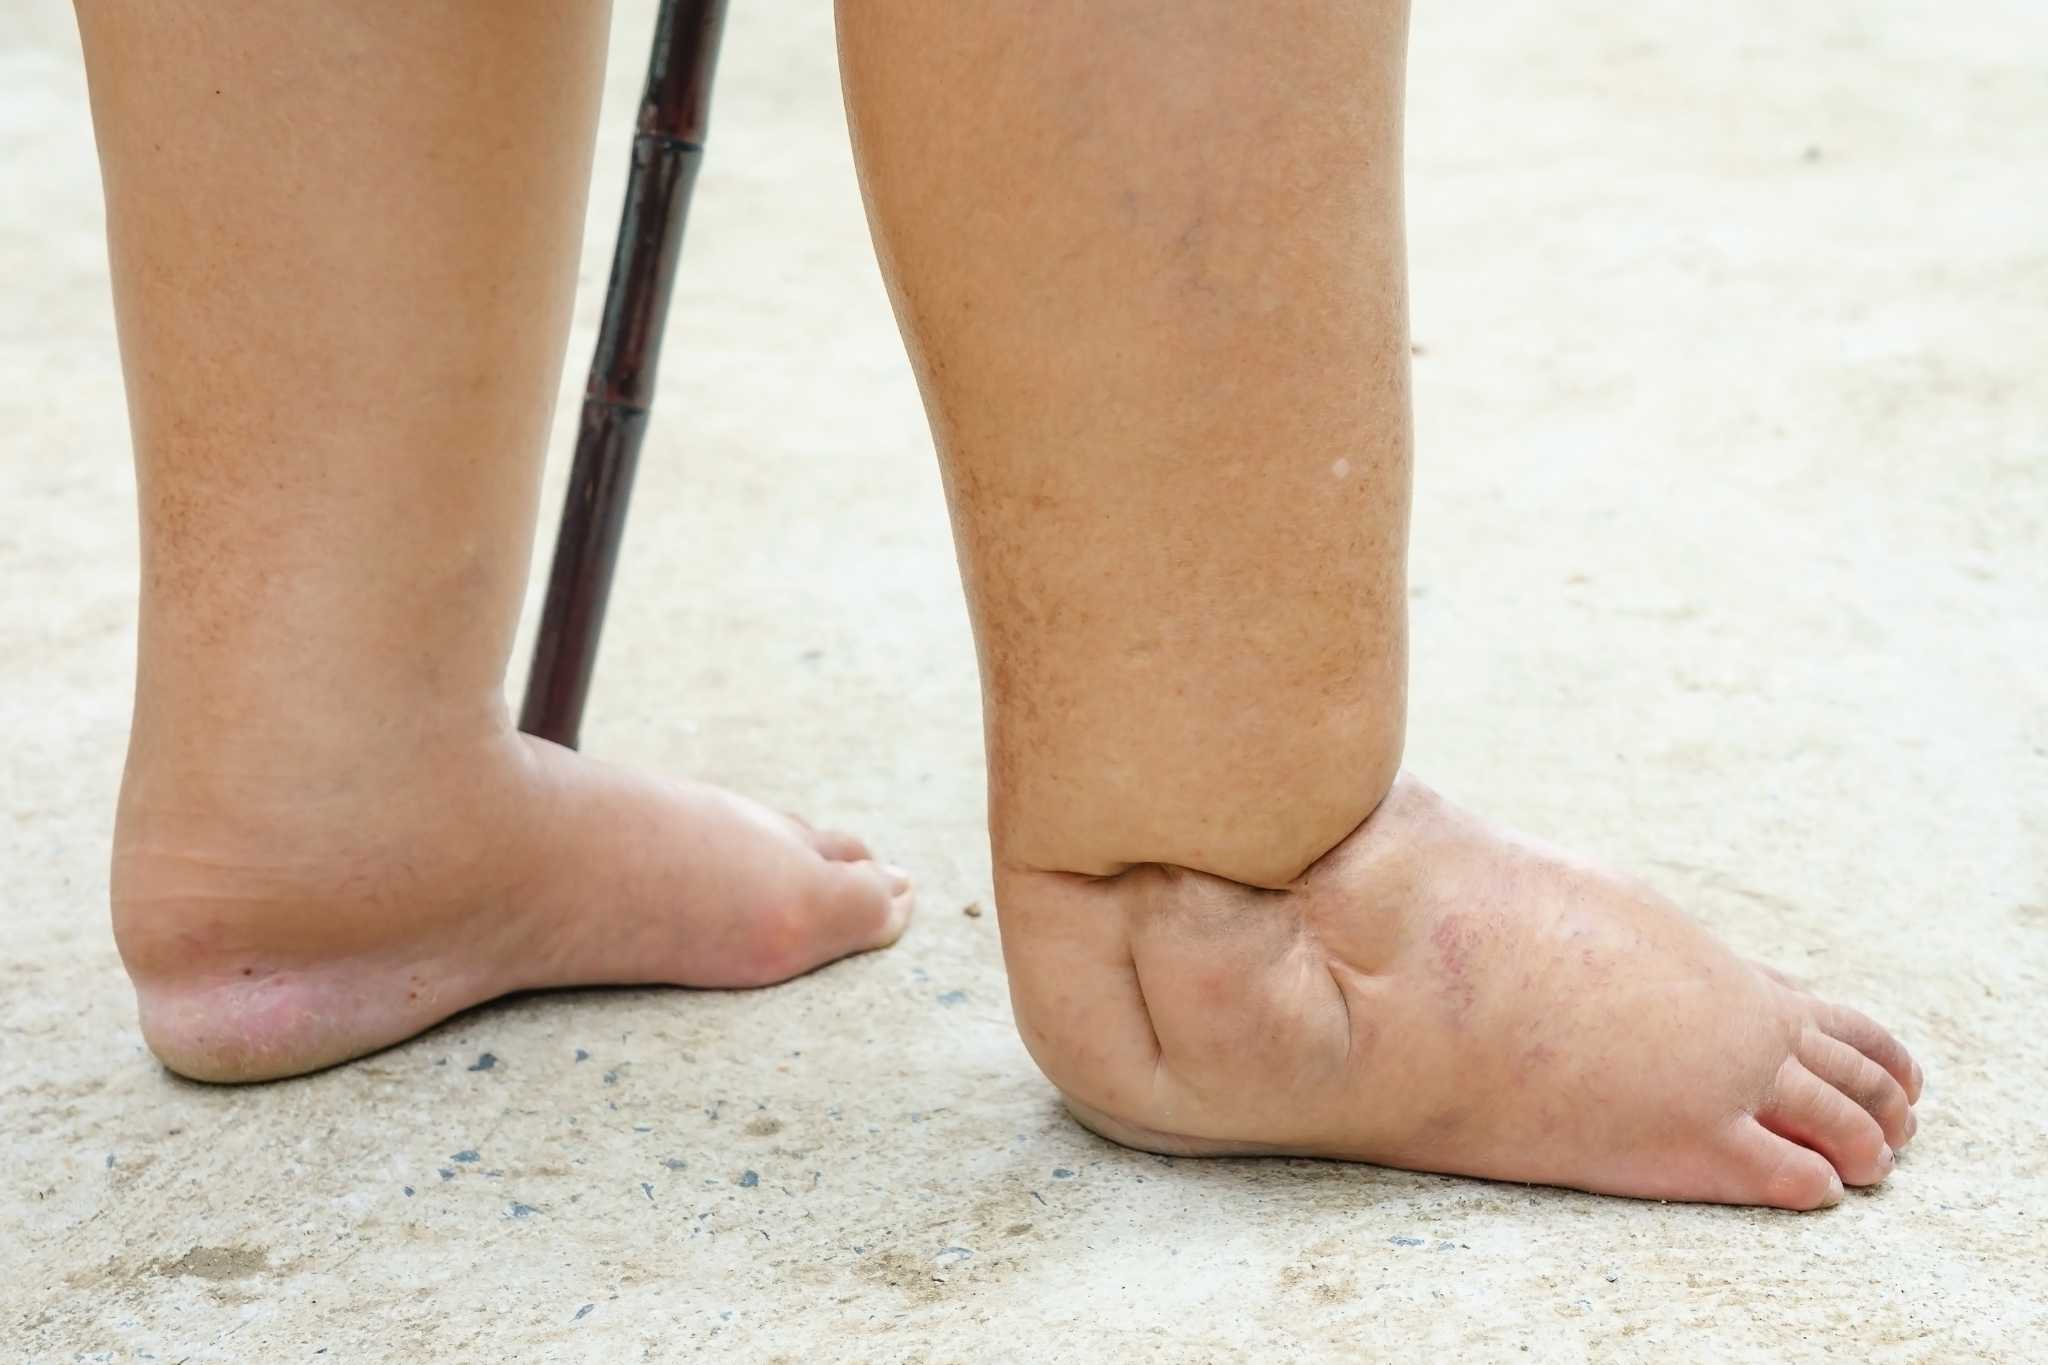 Feet of people with diabetes, dull and swollen. Due to the toxicity of diabetes placed on concrete floor